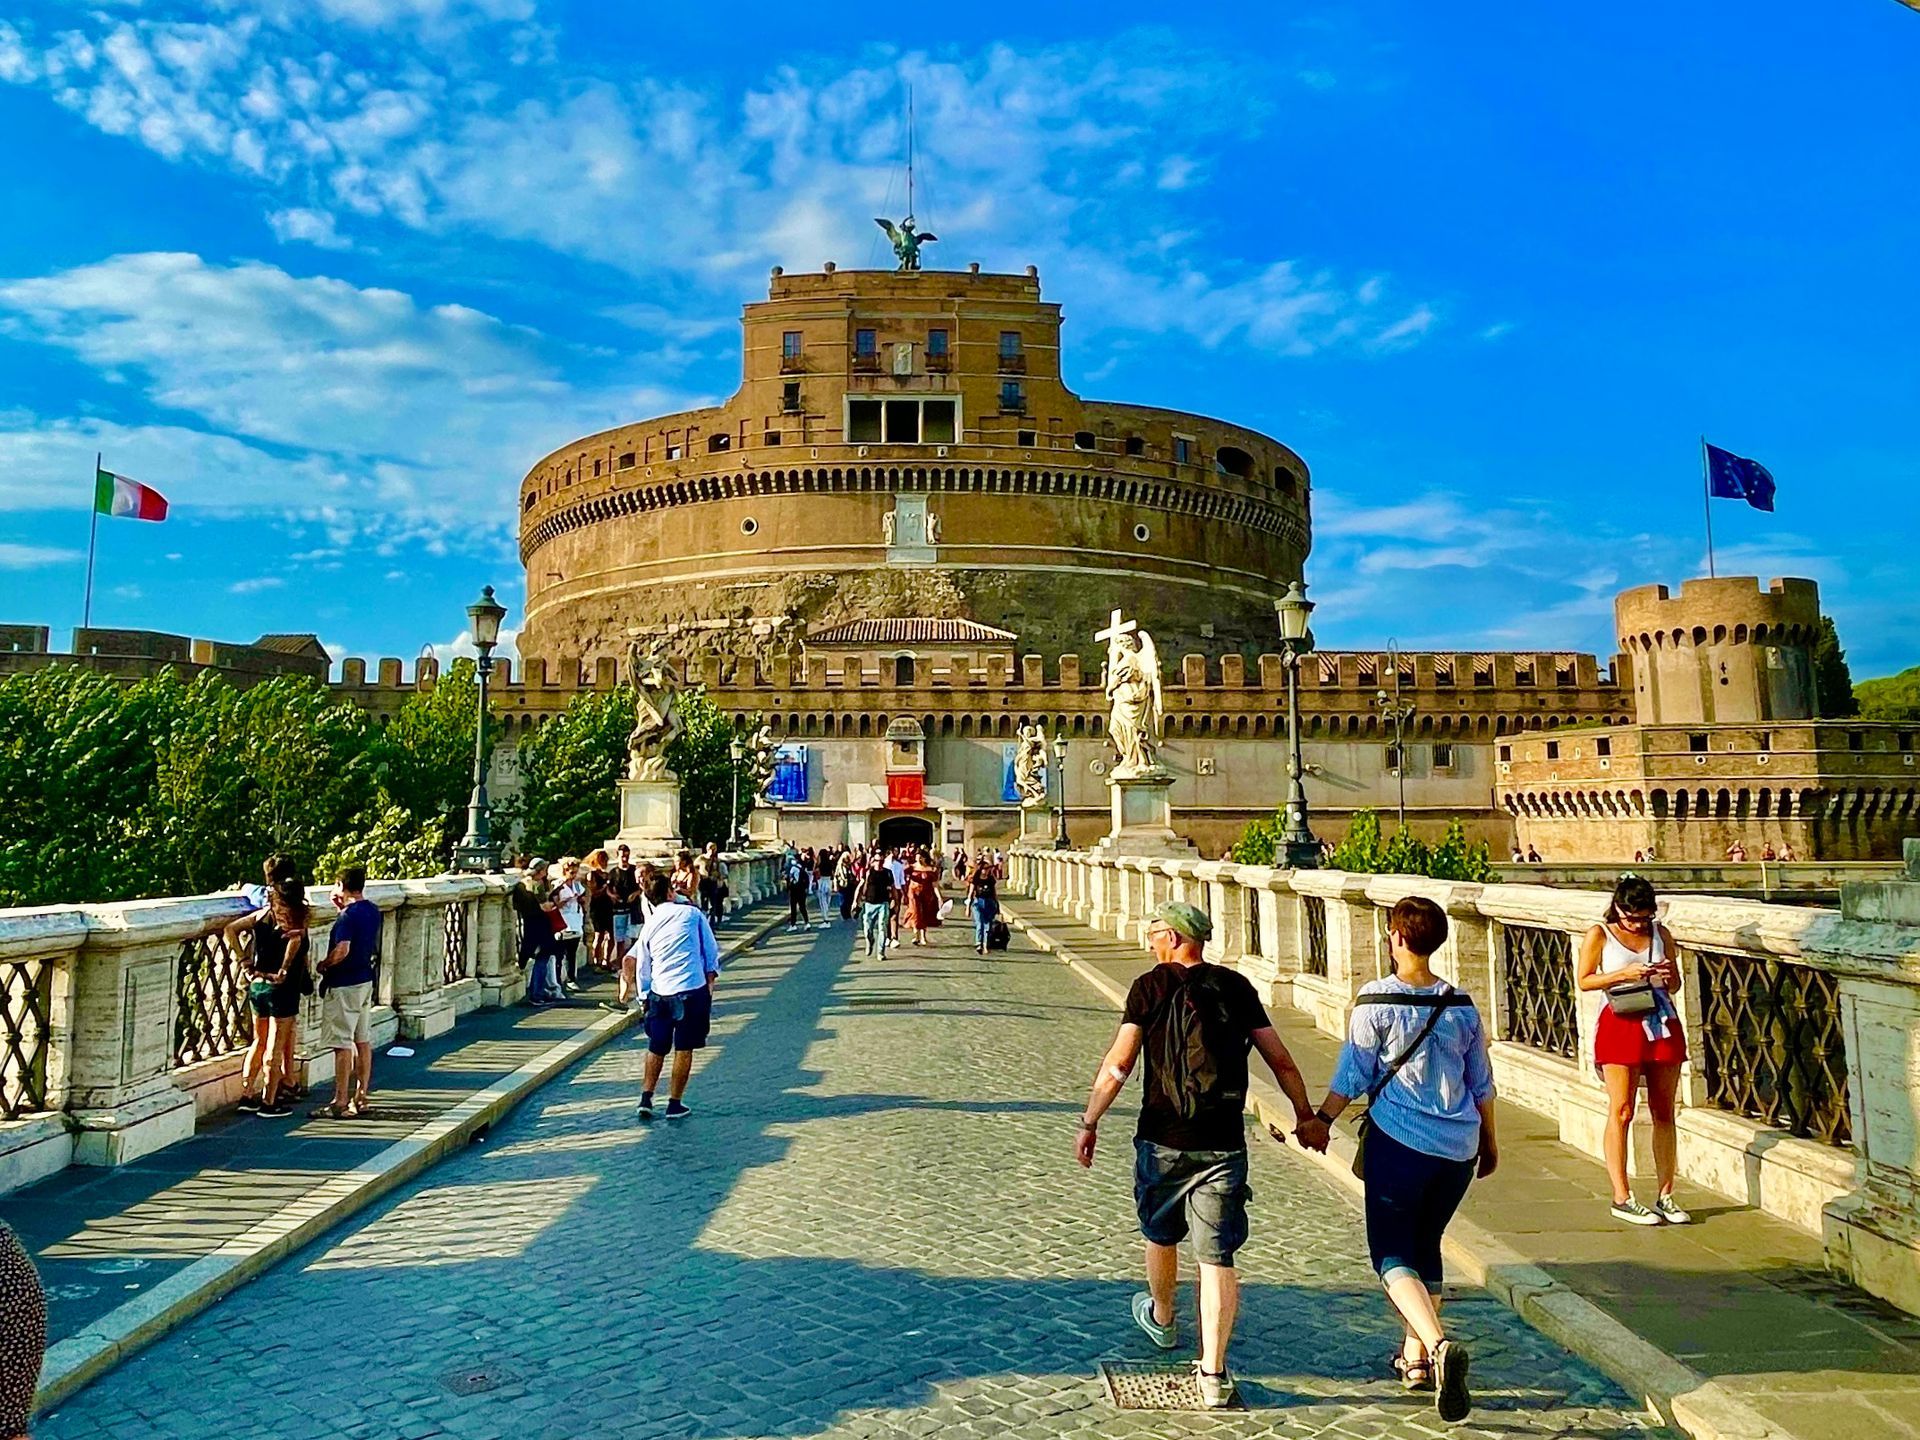 Castel Sant’Angelo Private Tours in Rome and Tickets, Official Guided Tours, Best Panoramas and View